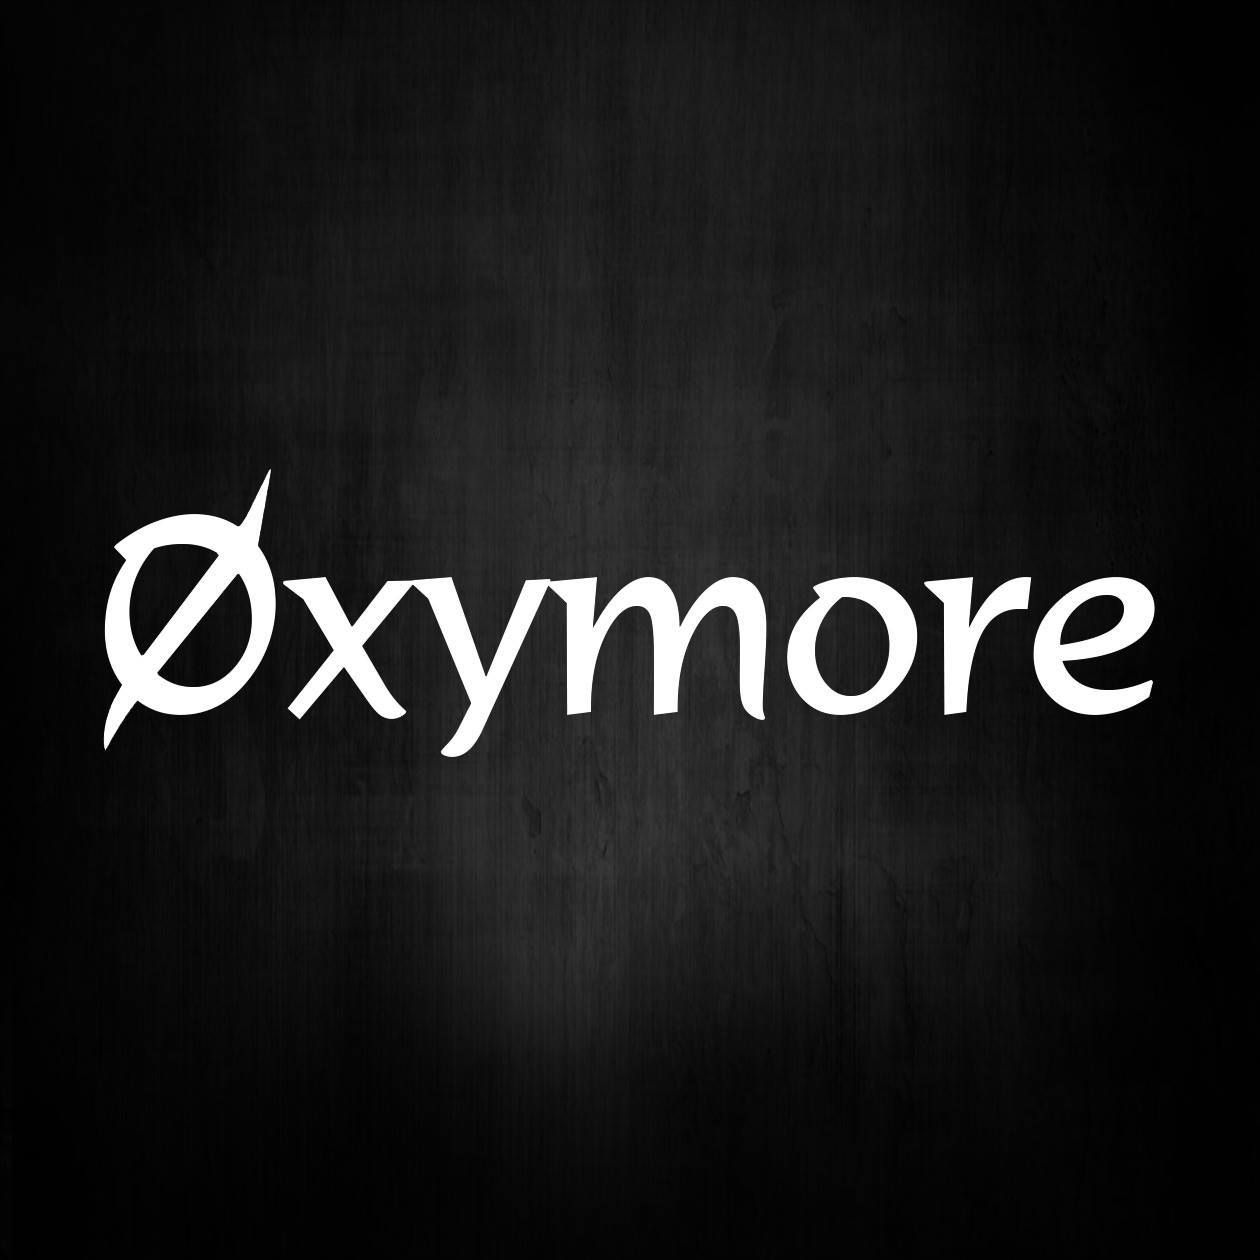 ∅xymore Group